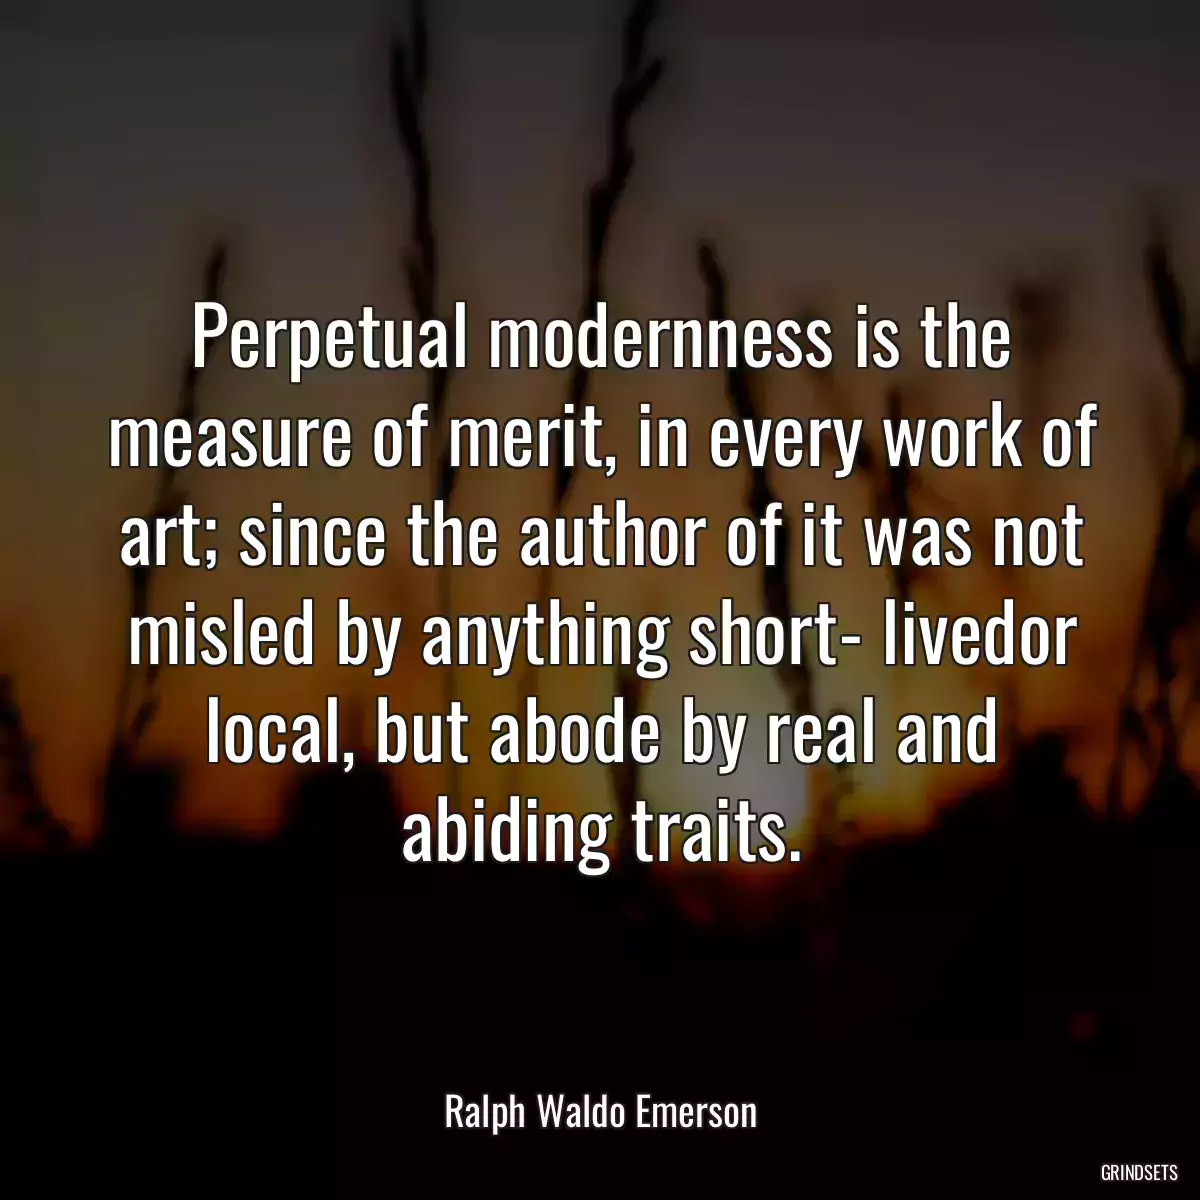 Perpetual modernness is the measure of merit, in every work of art; since the author of it was not misled by anything short- livedor local, but abode by real and abiding traits.